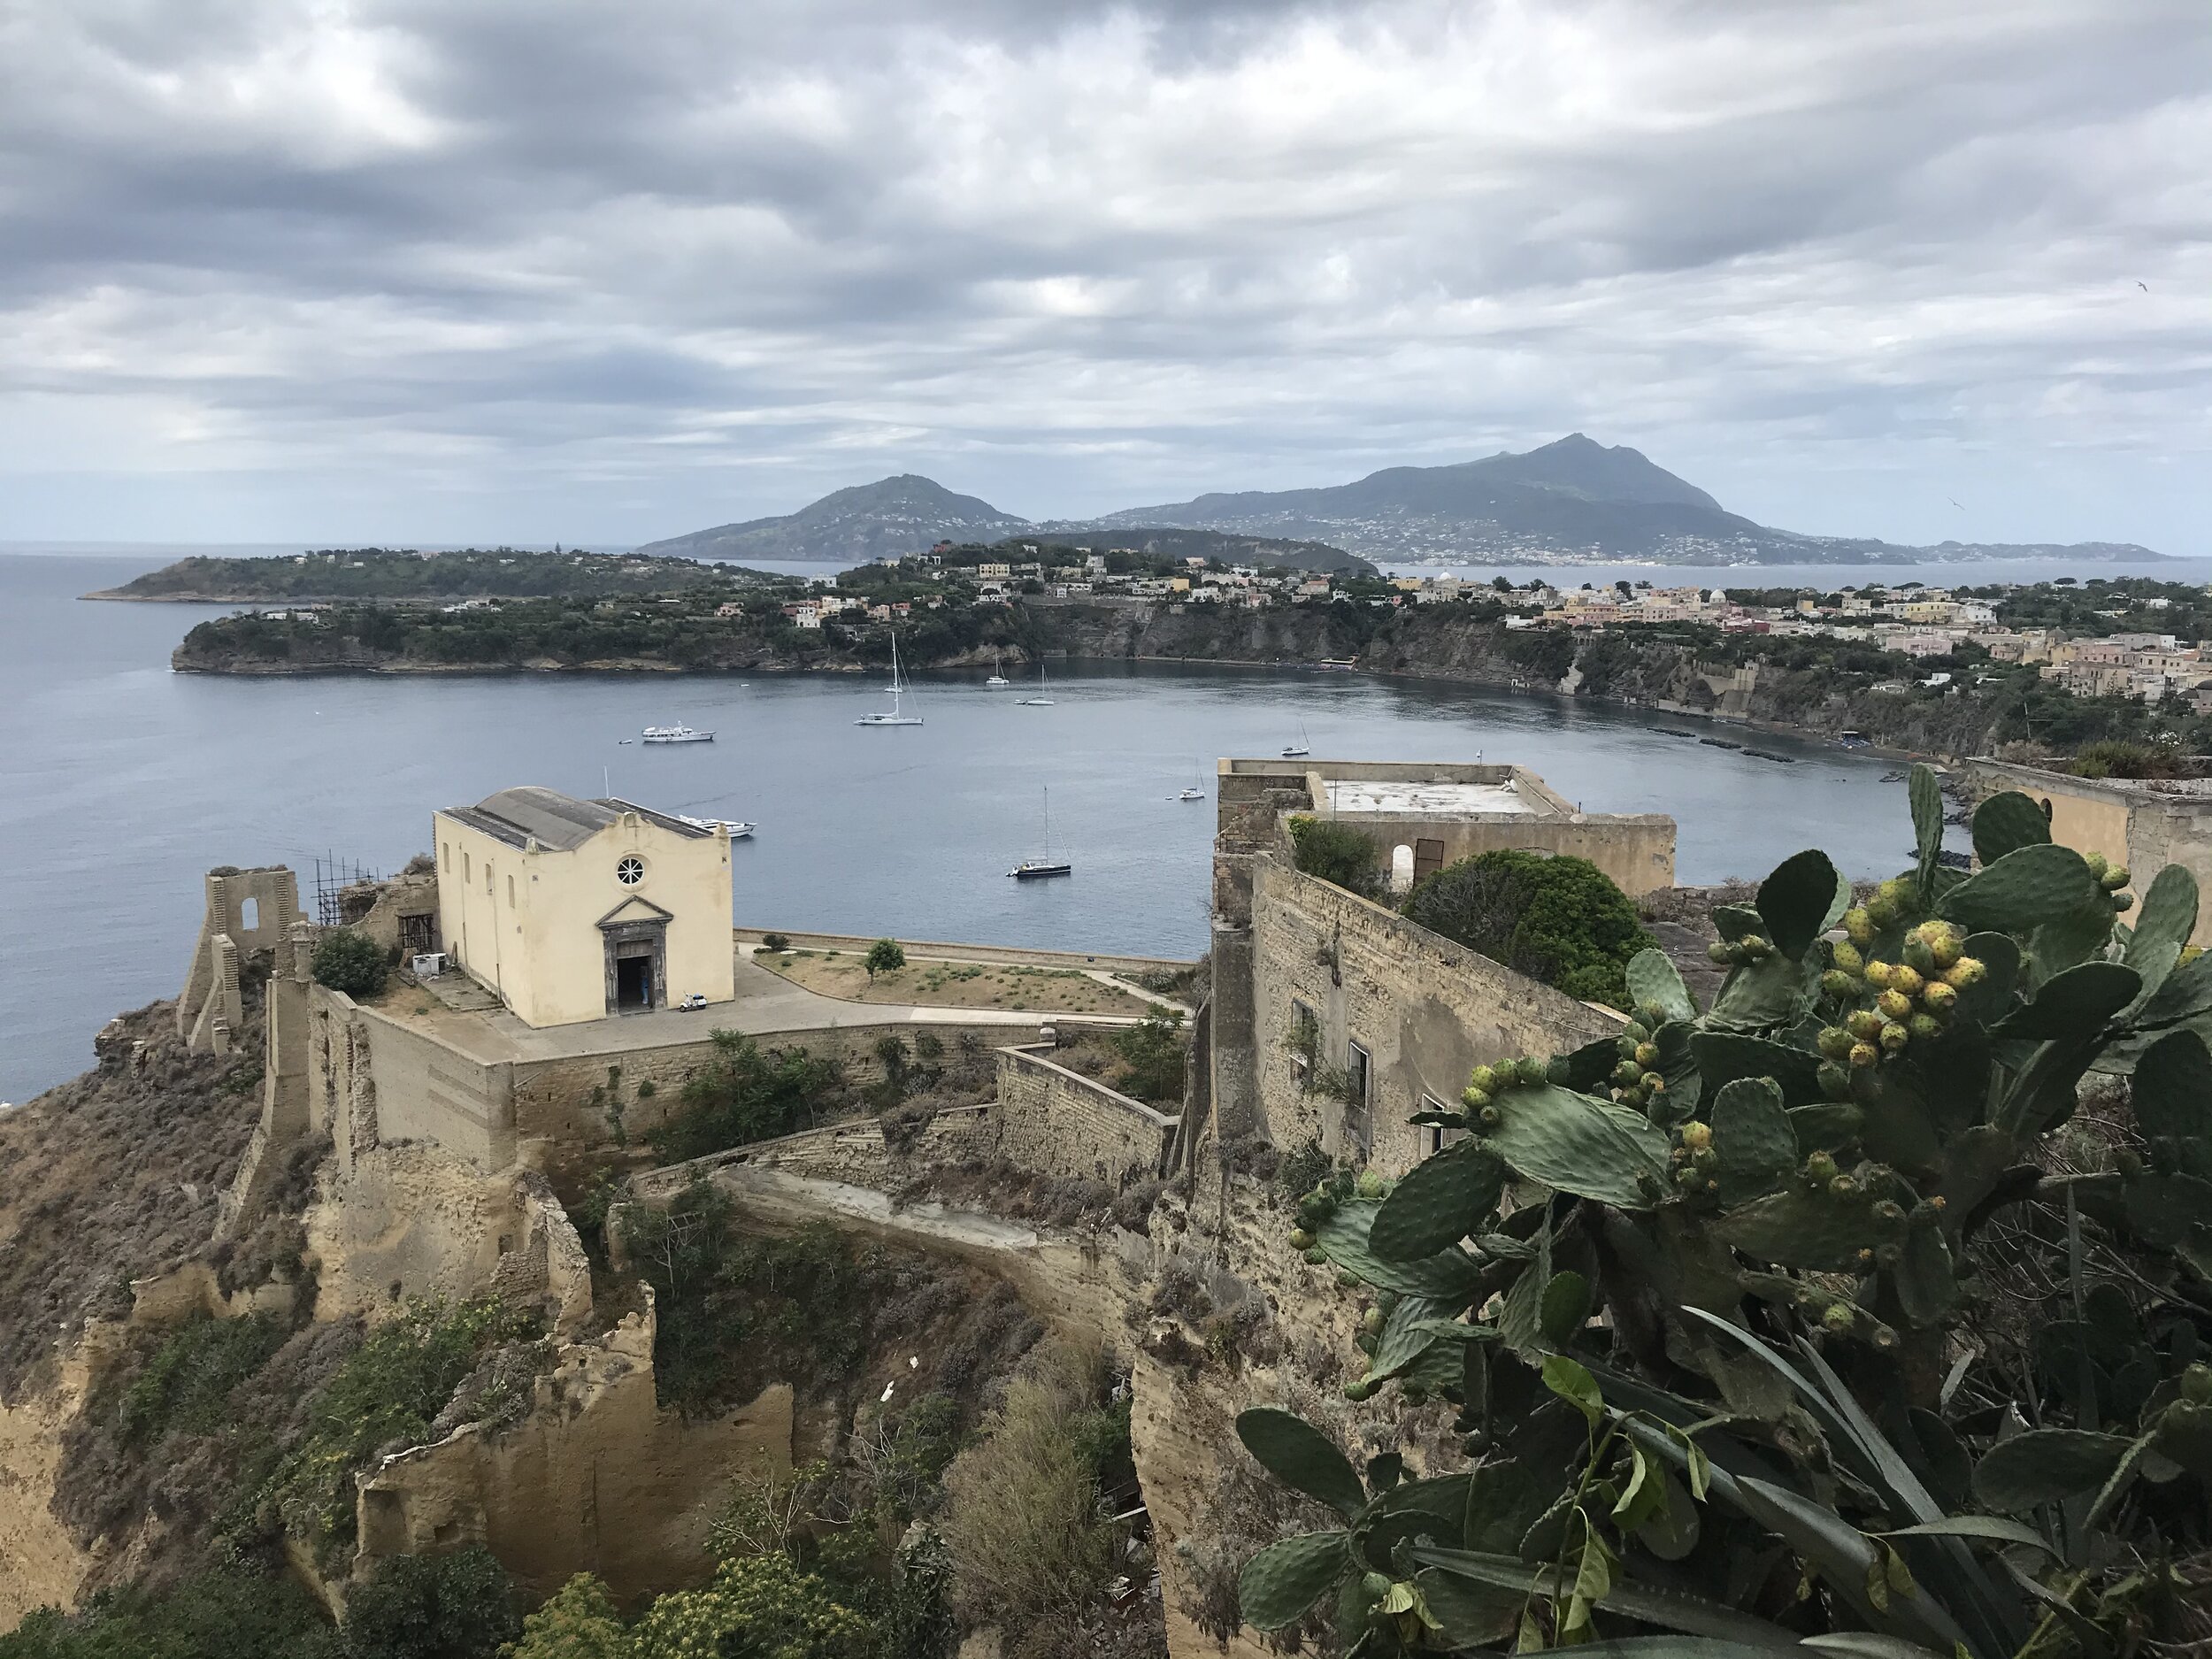 PROCIDA, Napoli. August 5th, 2020. PICTURED: Taken from the town streets above the old prison complex, the curve of Procida island bends dramatically around volcanically-blackened waters.